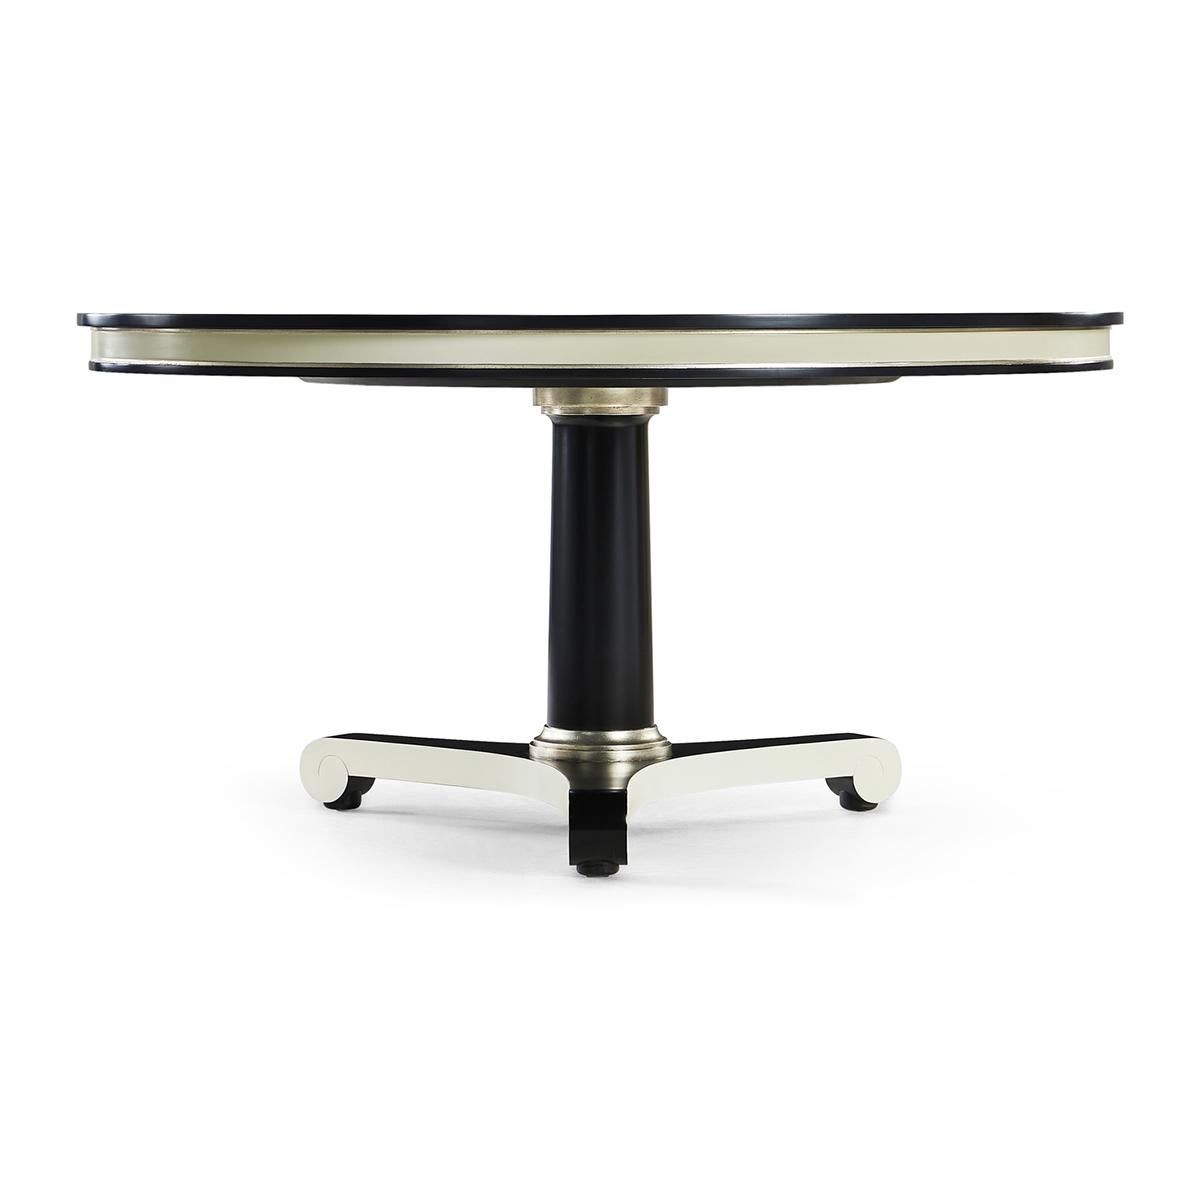 Classic black and white dining table inspired by the Biedermeier era, with clean lines, classic vibes and versatility which make it suitable for a variety of settings - dining, foyer, office or living. The bold black and white lines are accented